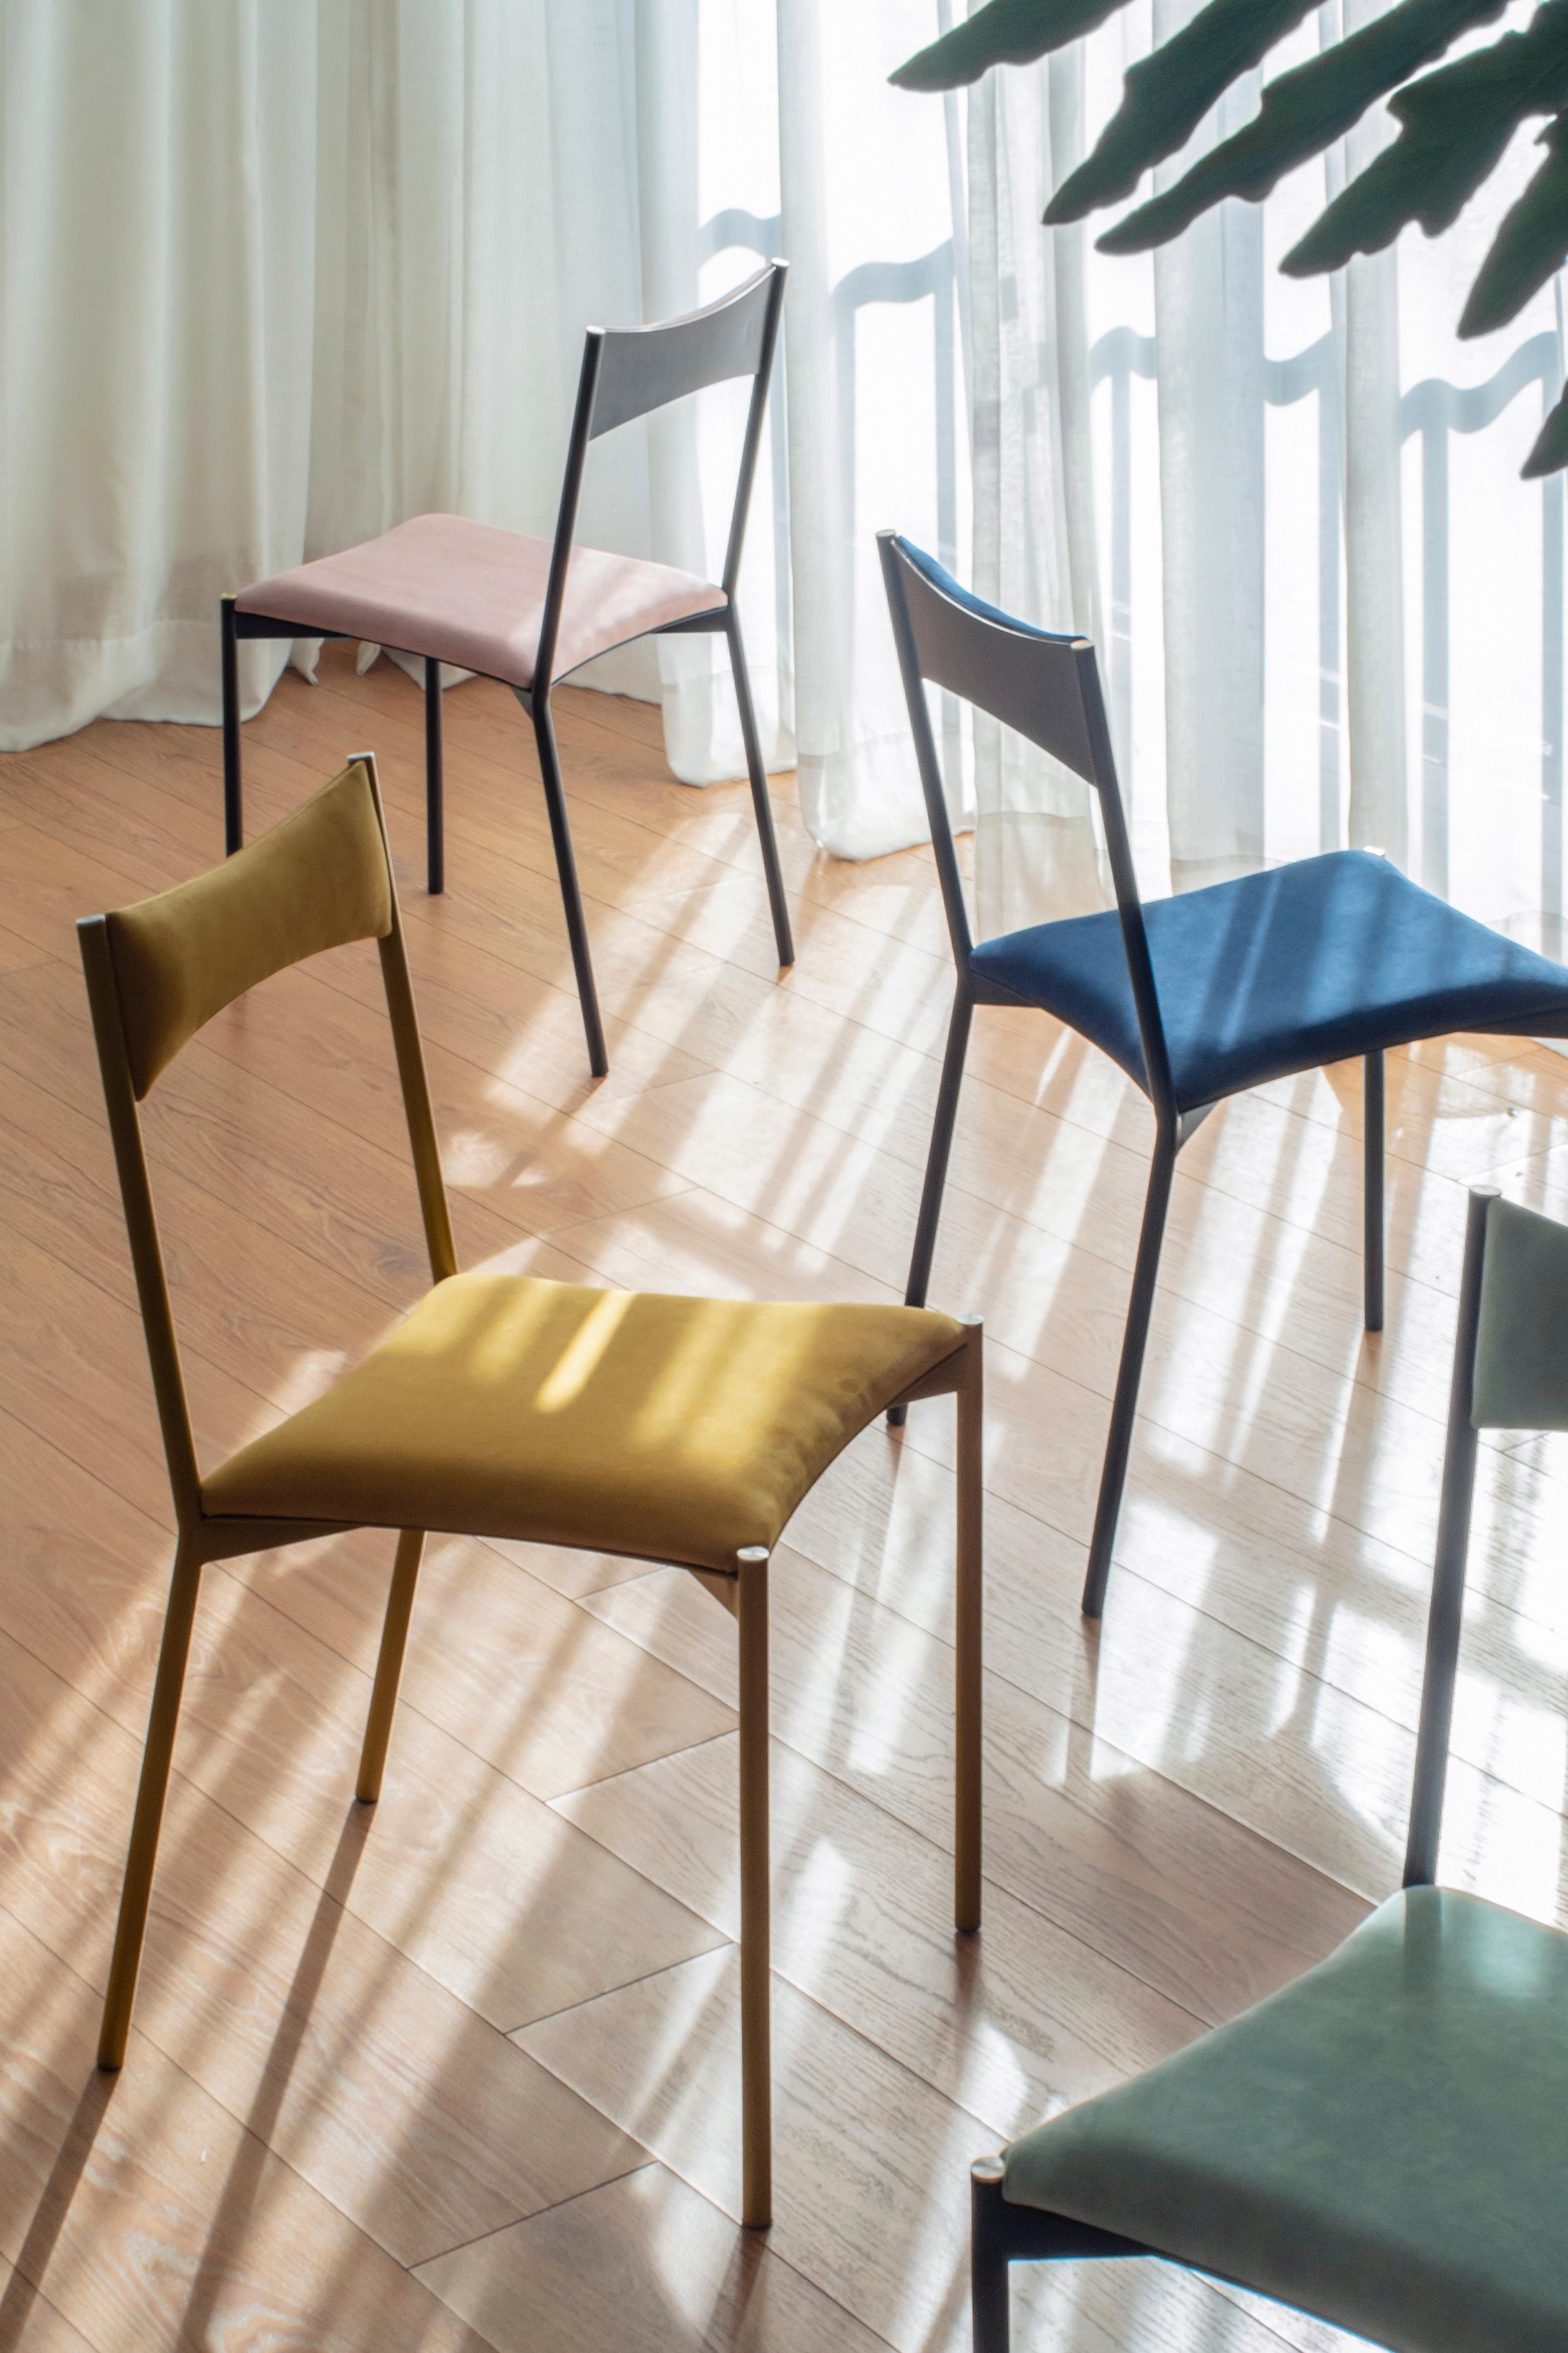 A set of 4 tensa chairs ( green, blue, yellow, pink ) by Ries
Dimensions: W40 x D49,5 x H82 cm 
Materials: Round steel tube, laser cut metal sheet, high density foam, velvet upholstery, aluminum/bronze caps
Matte powder coated painting